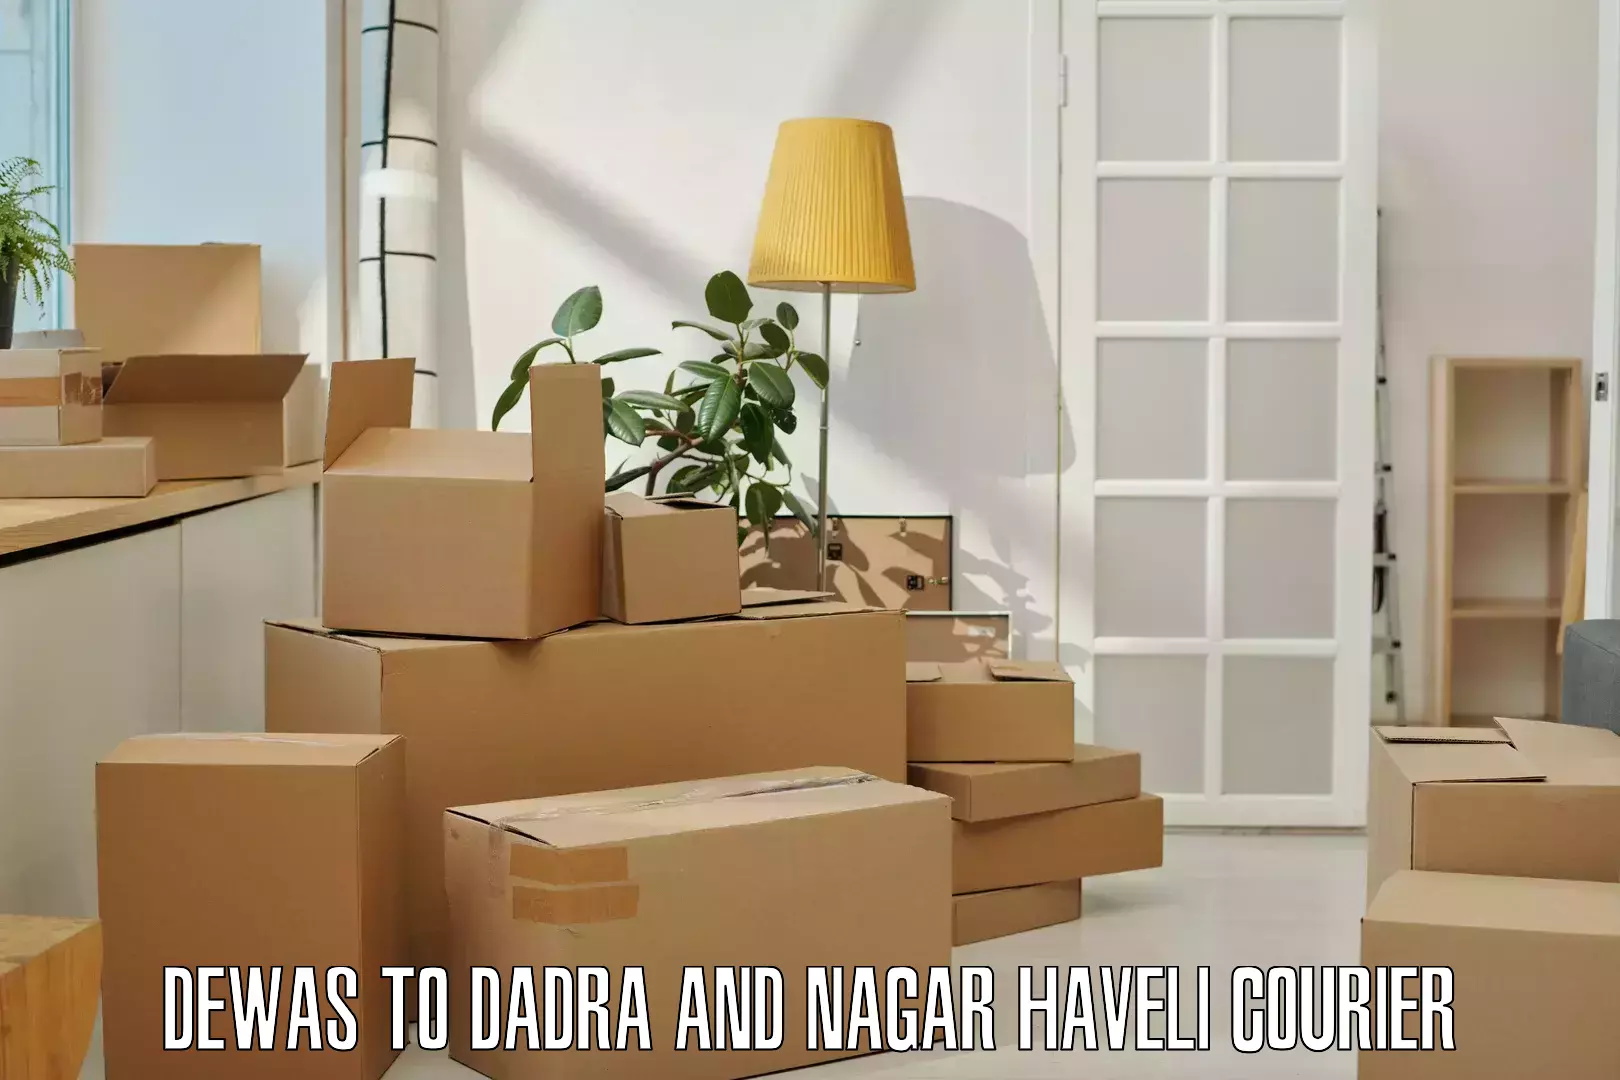 Multi-national courier services Dewas to Dadra and Nagar Haveli